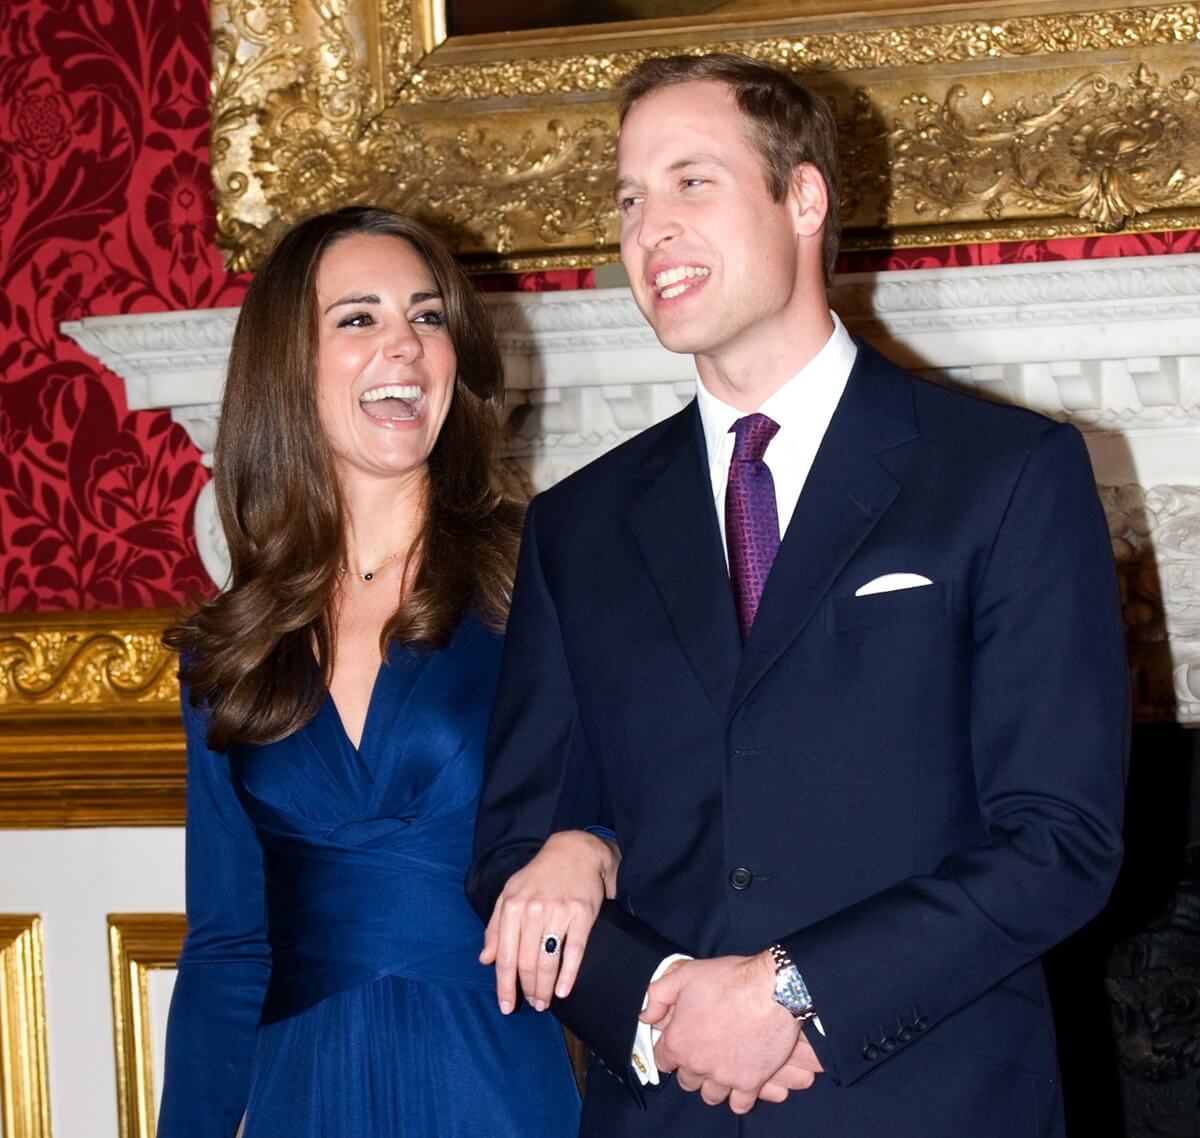 Prince William and Kate Middleton pose for photographs after announcing their engagement